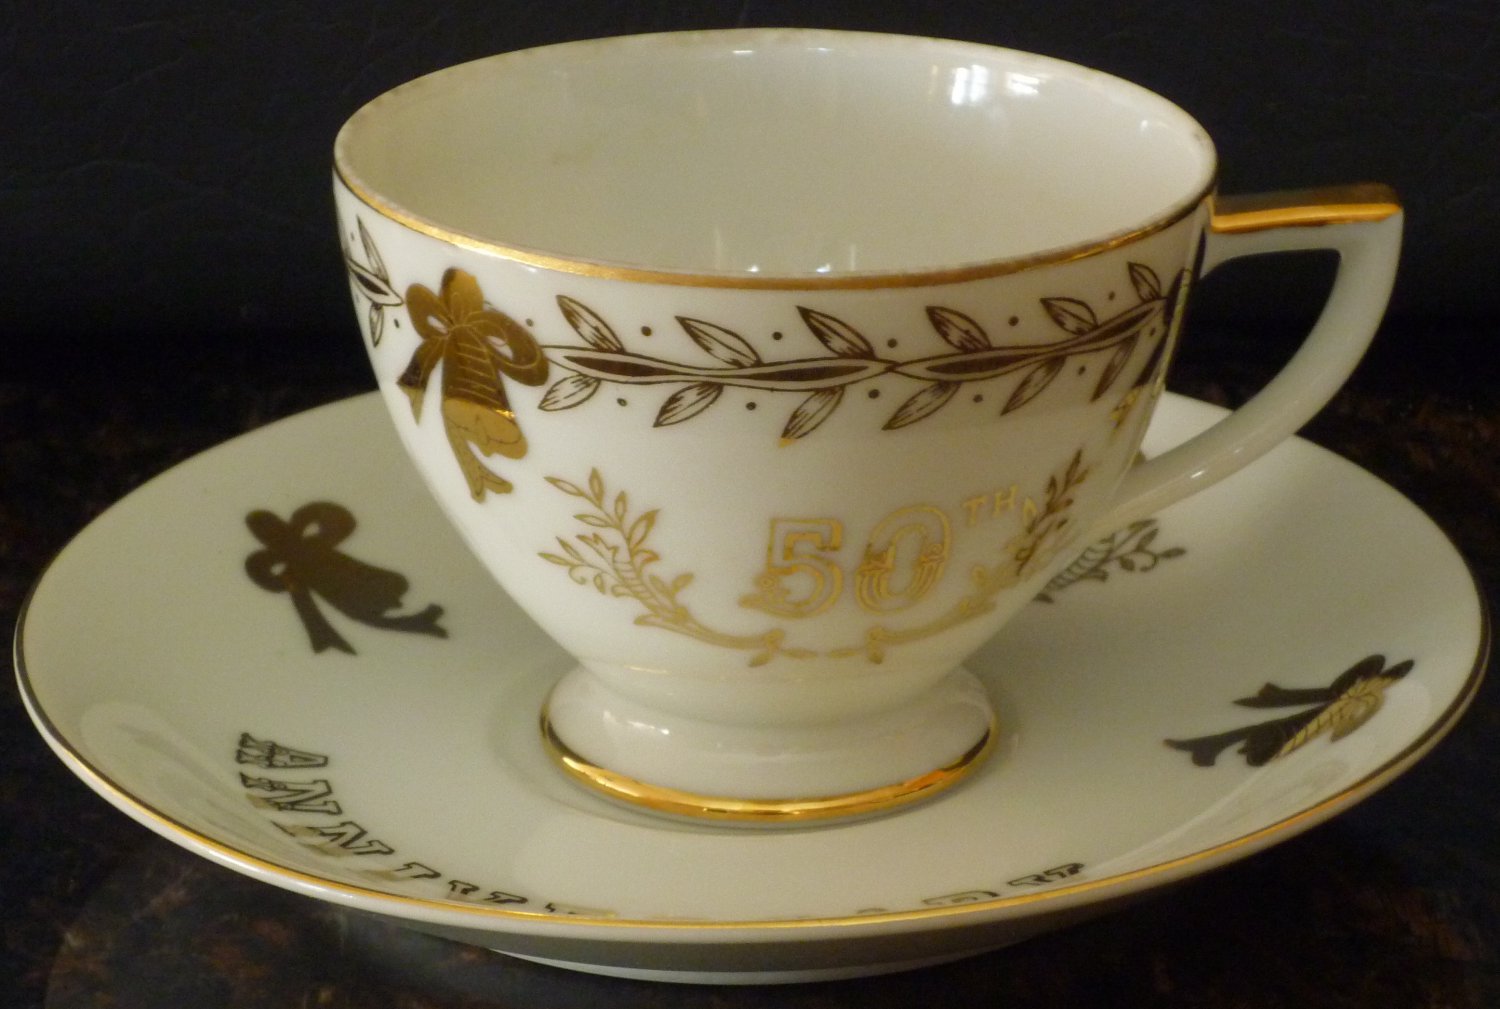 VINTAGE LEFTON FINE CHINA HANDPAINTED 50TH ANNIVERSARY CUP AND SAUCER SET